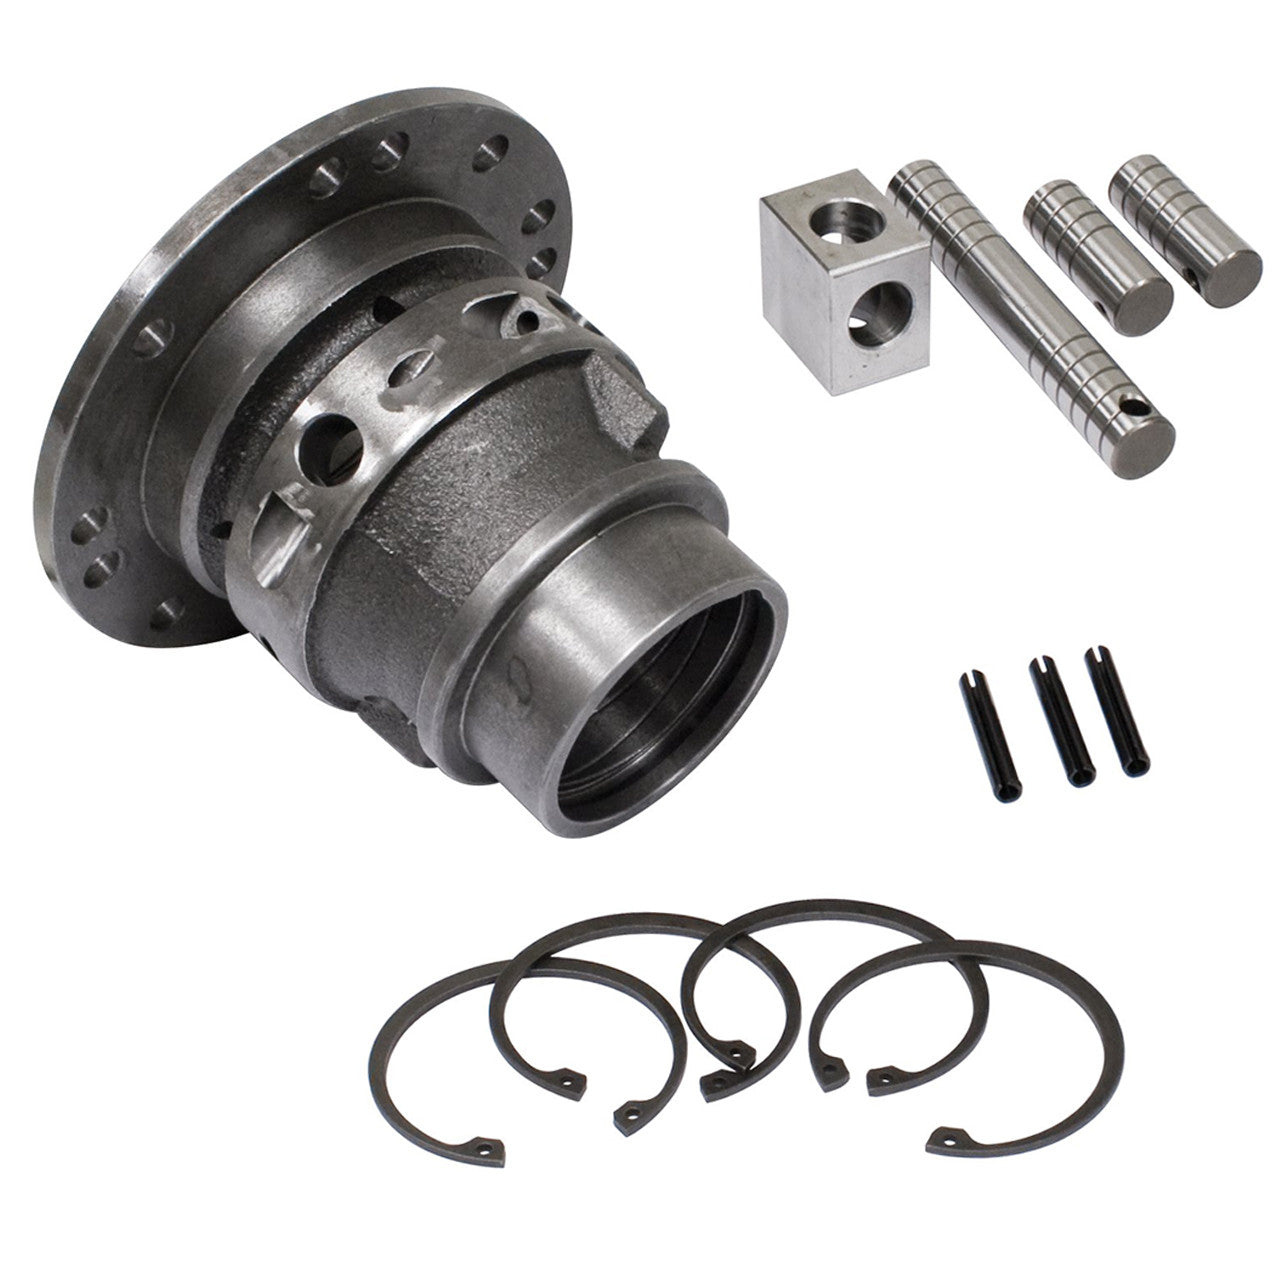 Snap Ring Super Diff For Type 1 Vw Bug Swing Axle Transmission